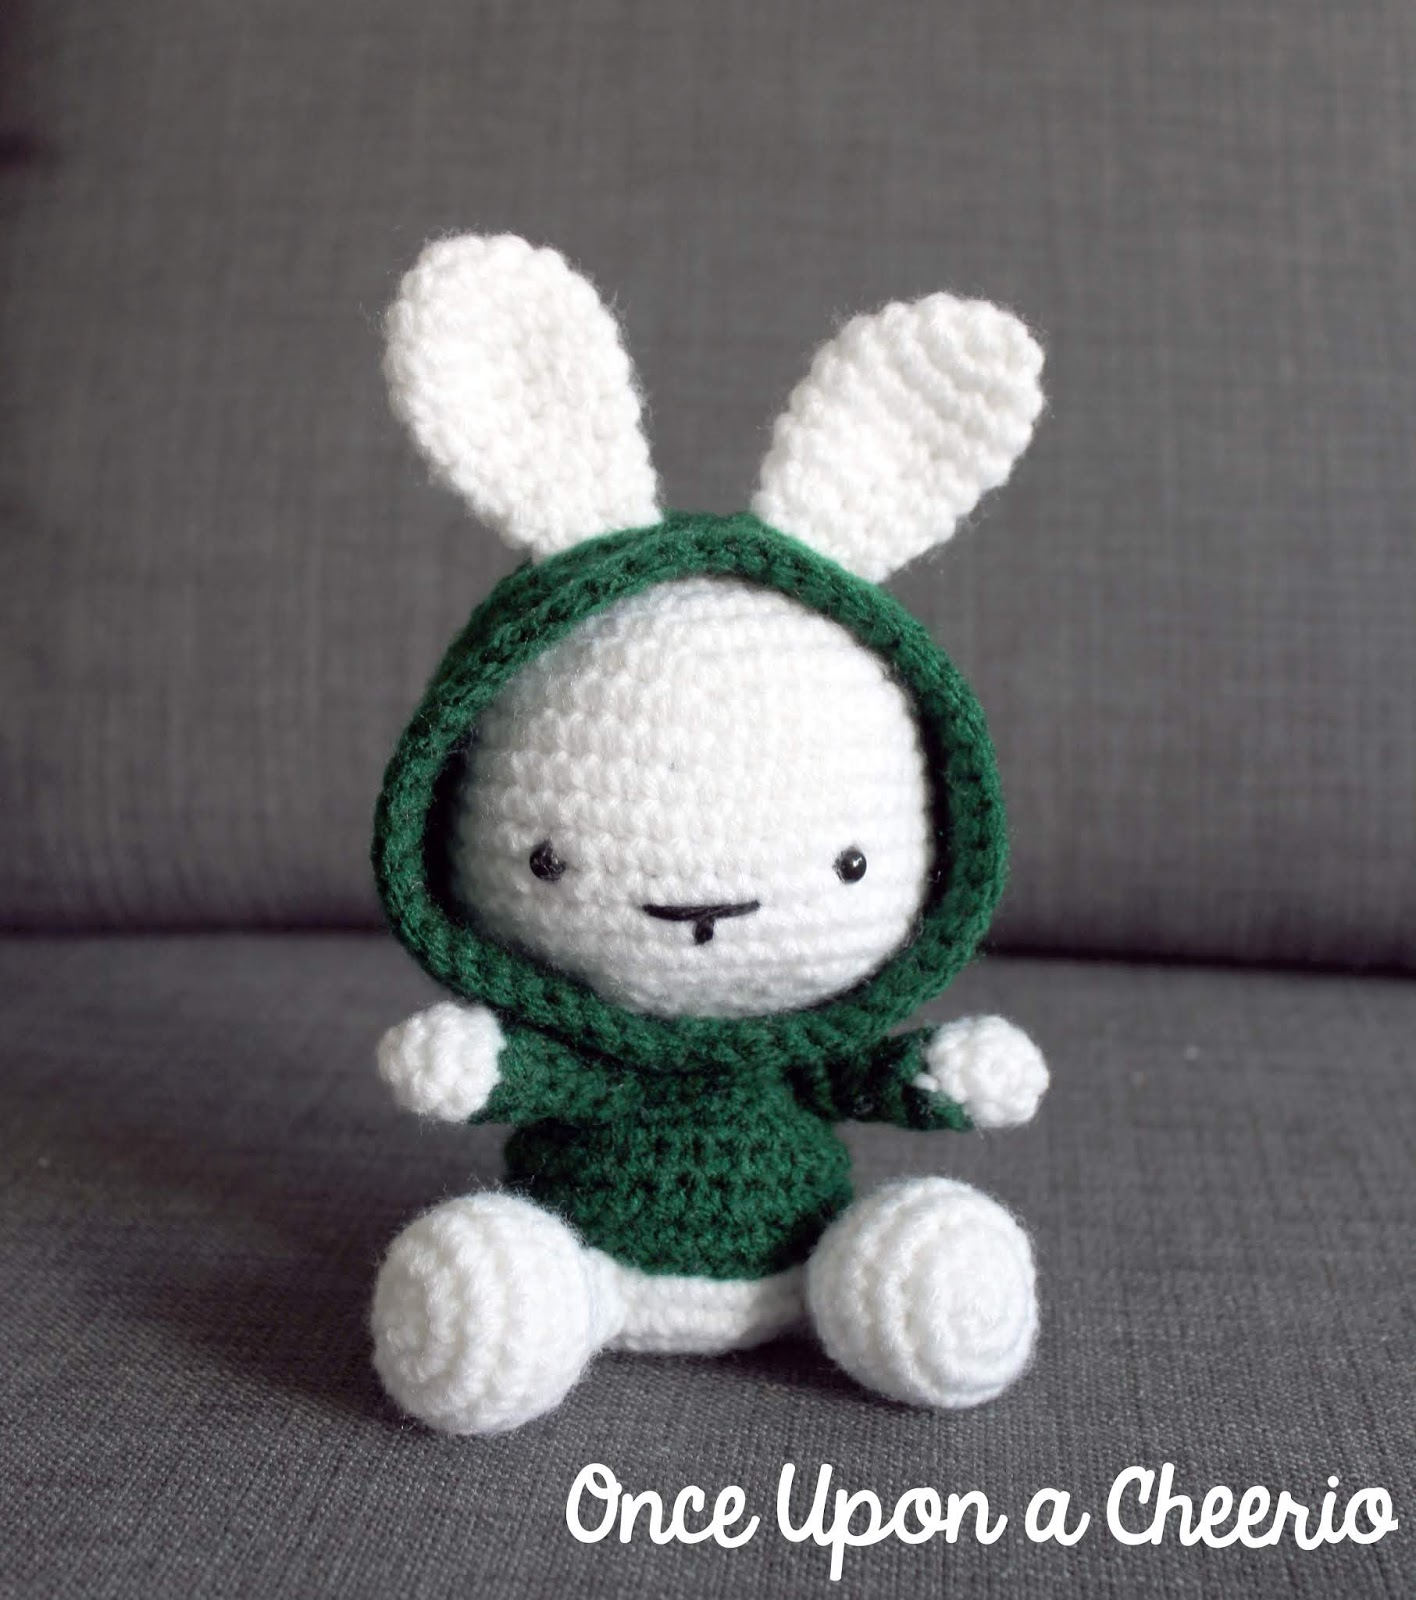 Bunny Crochet Pattern Some Bunny In The Hood Crochet Pattern Once Upon A Cheerio